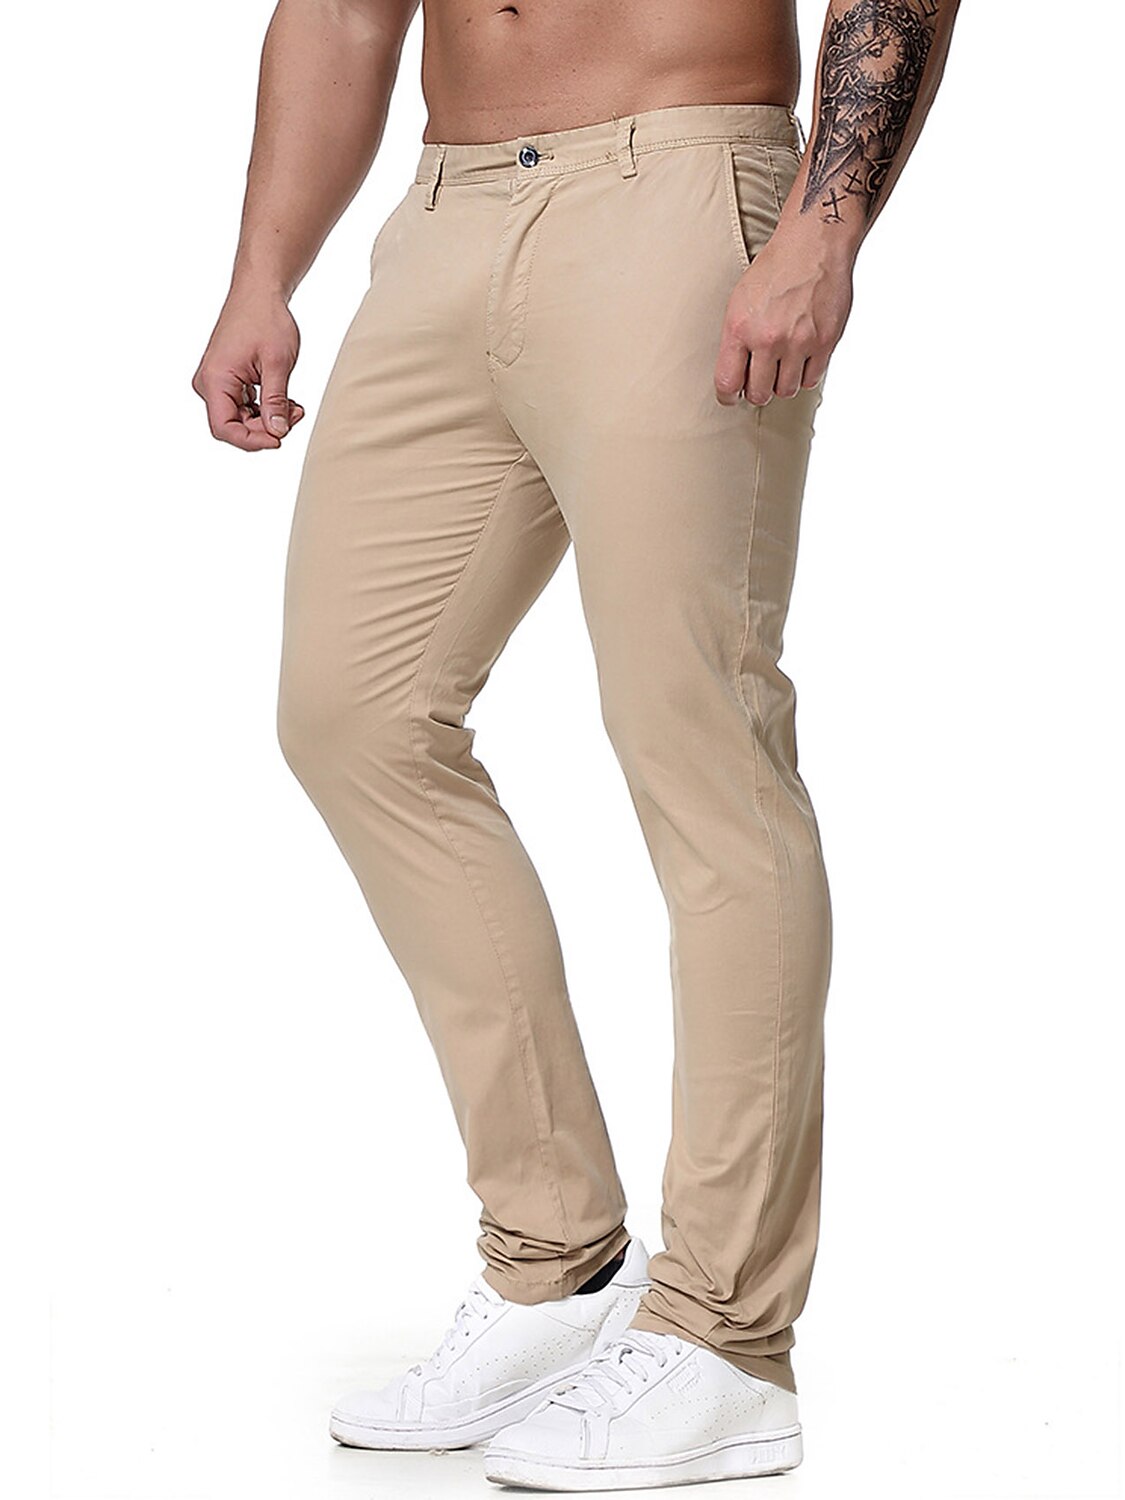 Men's Chino Pants Pocket Plain Comfort Breathable Business Daily Cotton Blend Fashion Casual Trousers 